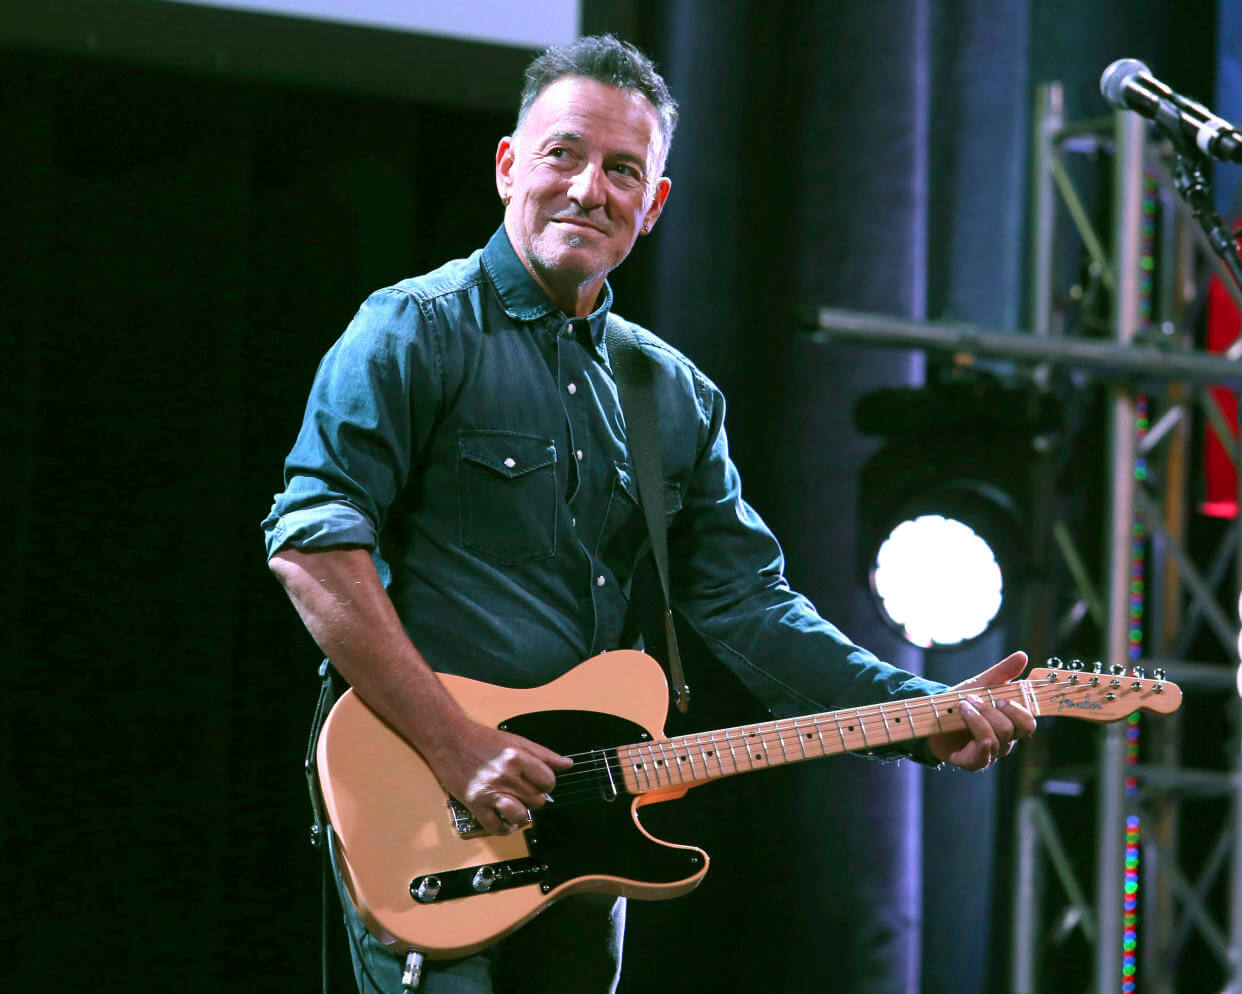 “Bruce Springsteen’s Artifacts Coming to Grammy Museum”